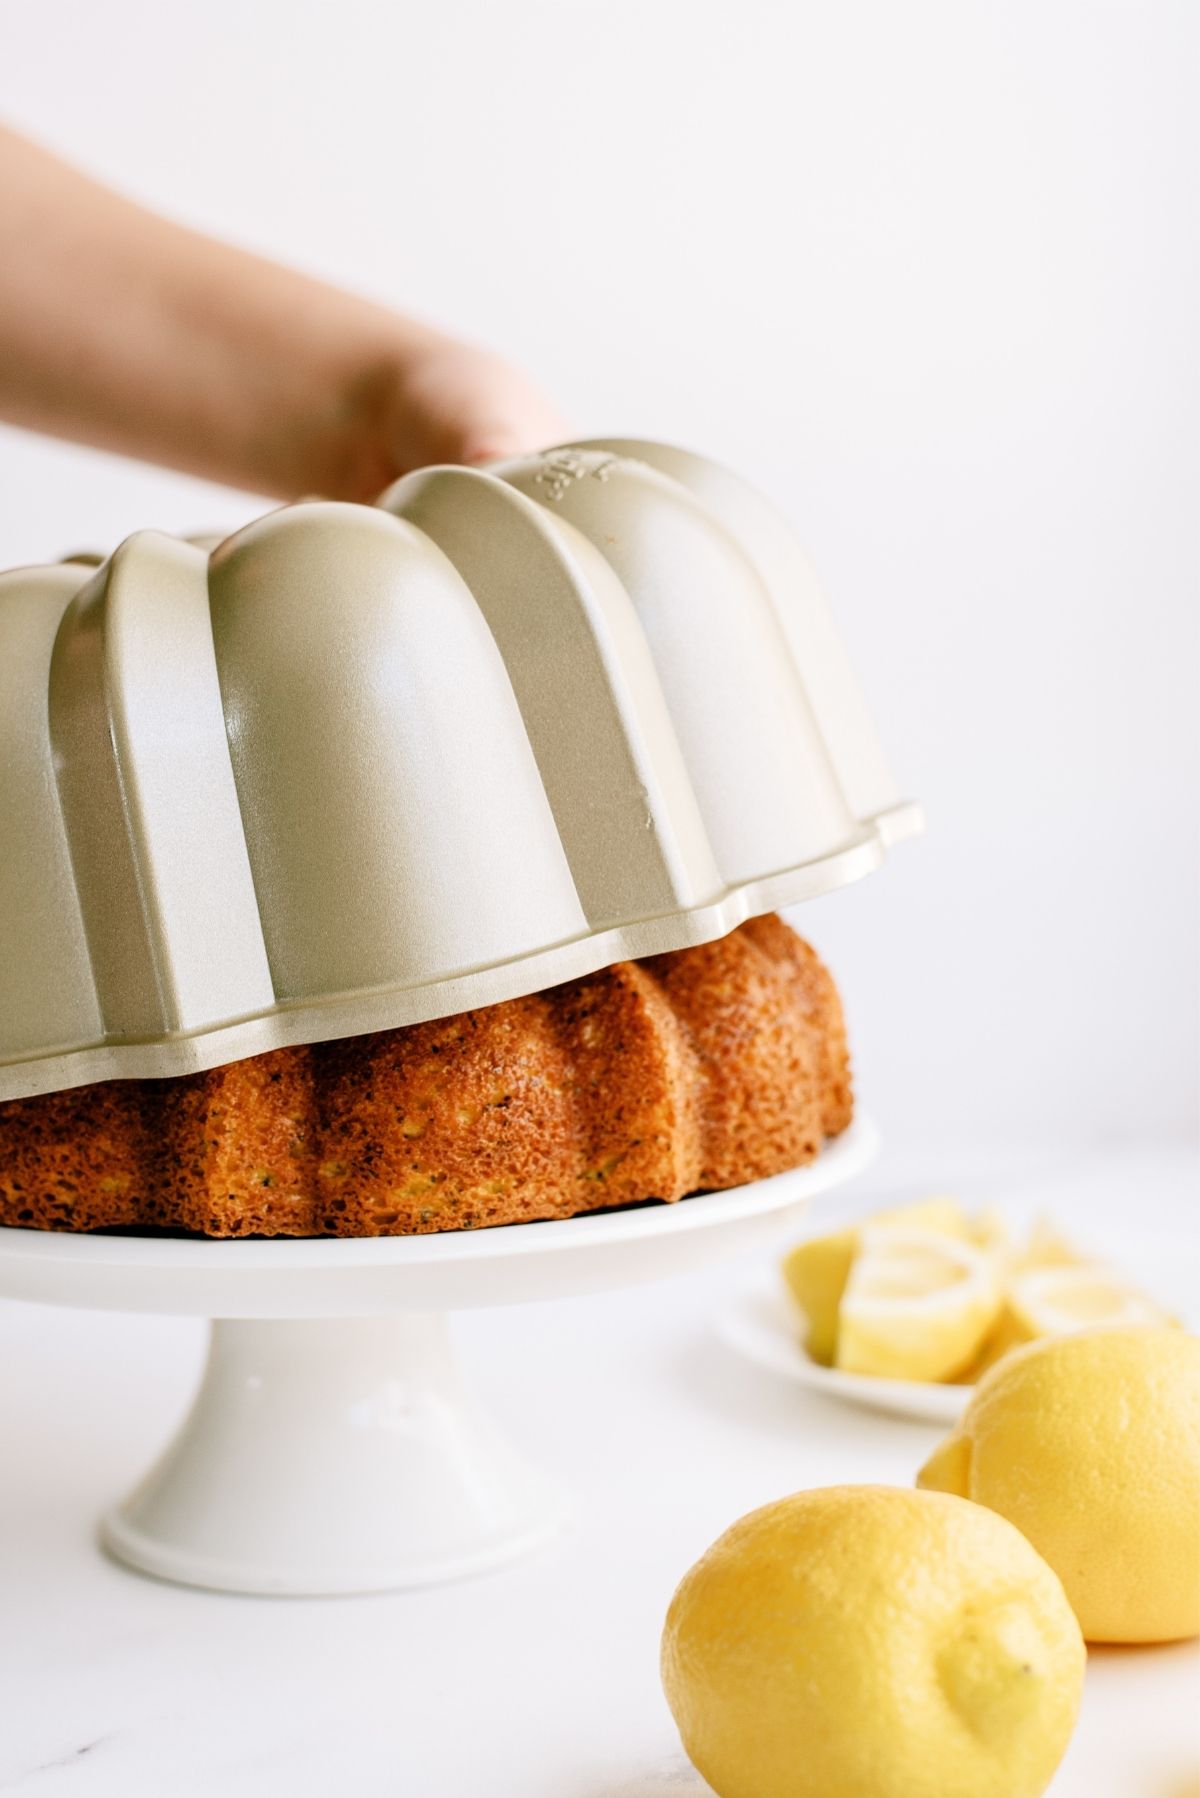 Lemon Poppy Seed Bundt Cake coming out of the Bundt pan onto a cake stand